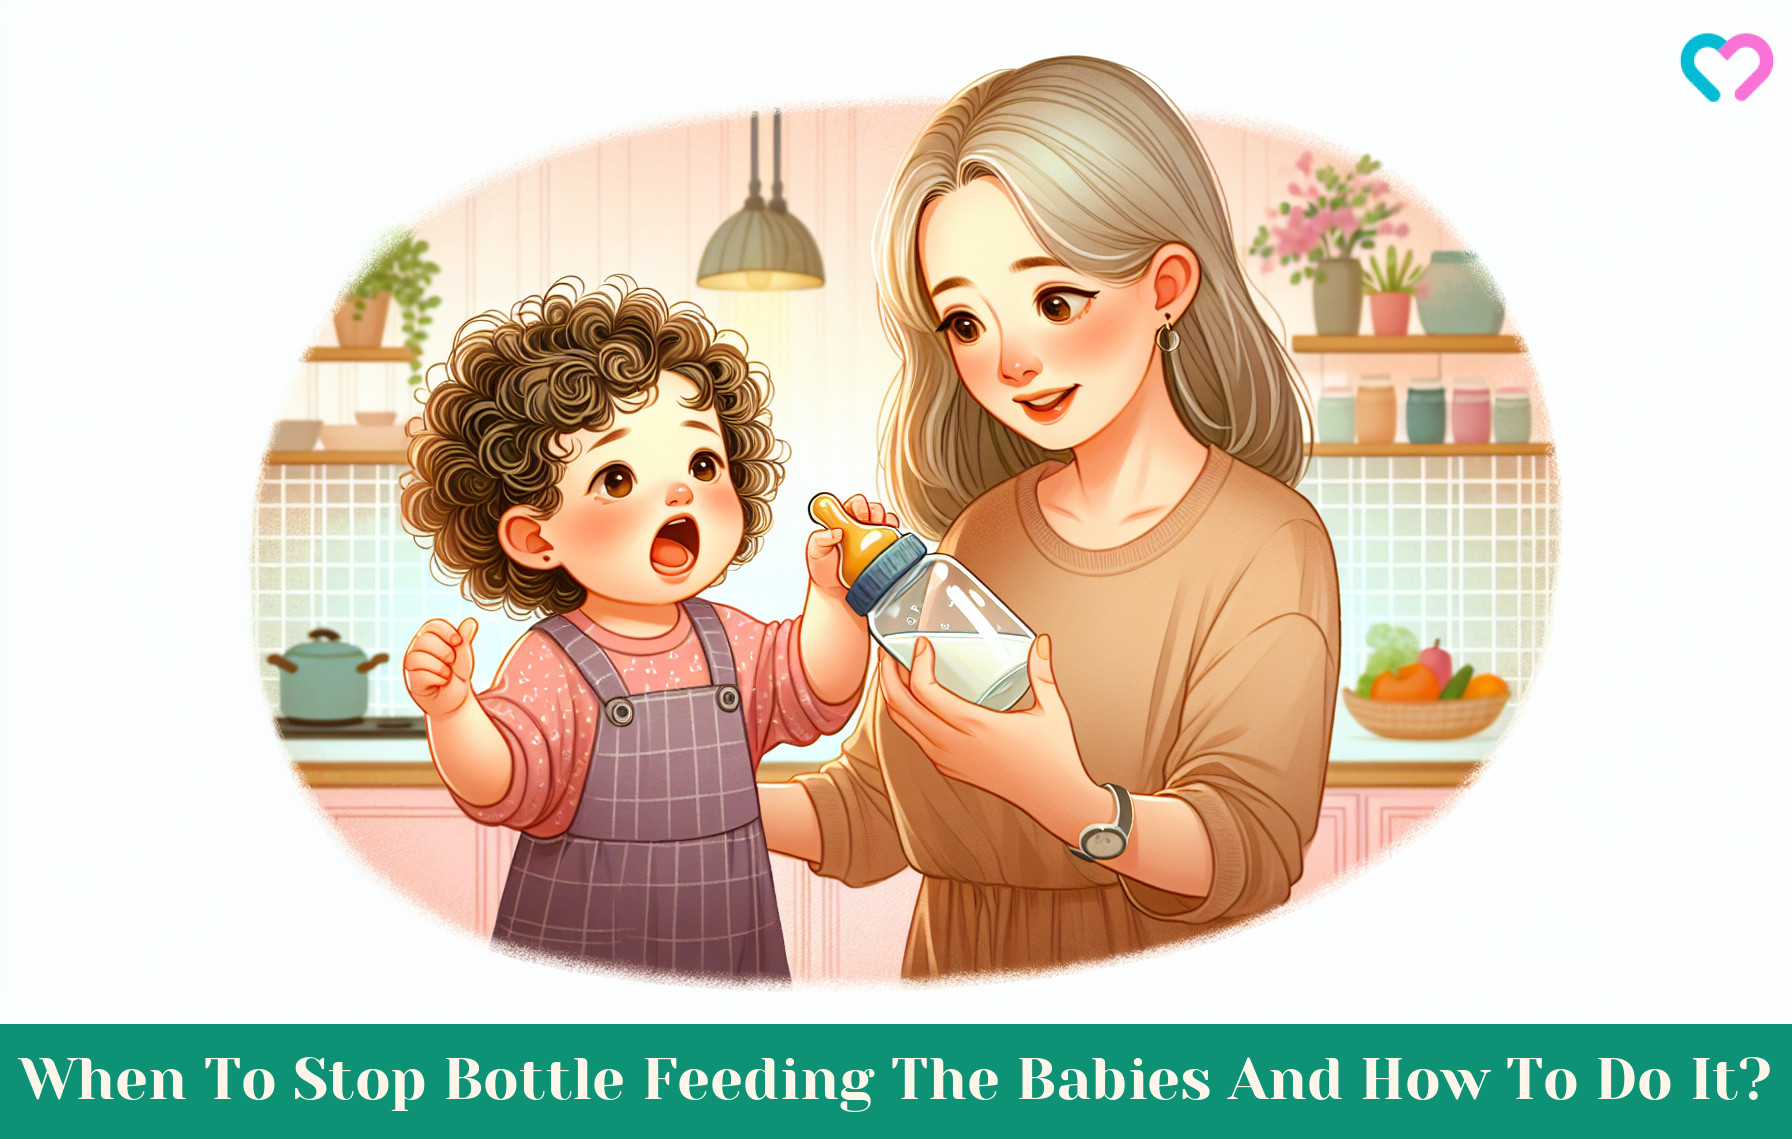 When To Stop Bottle Feeding The Babies_illustration